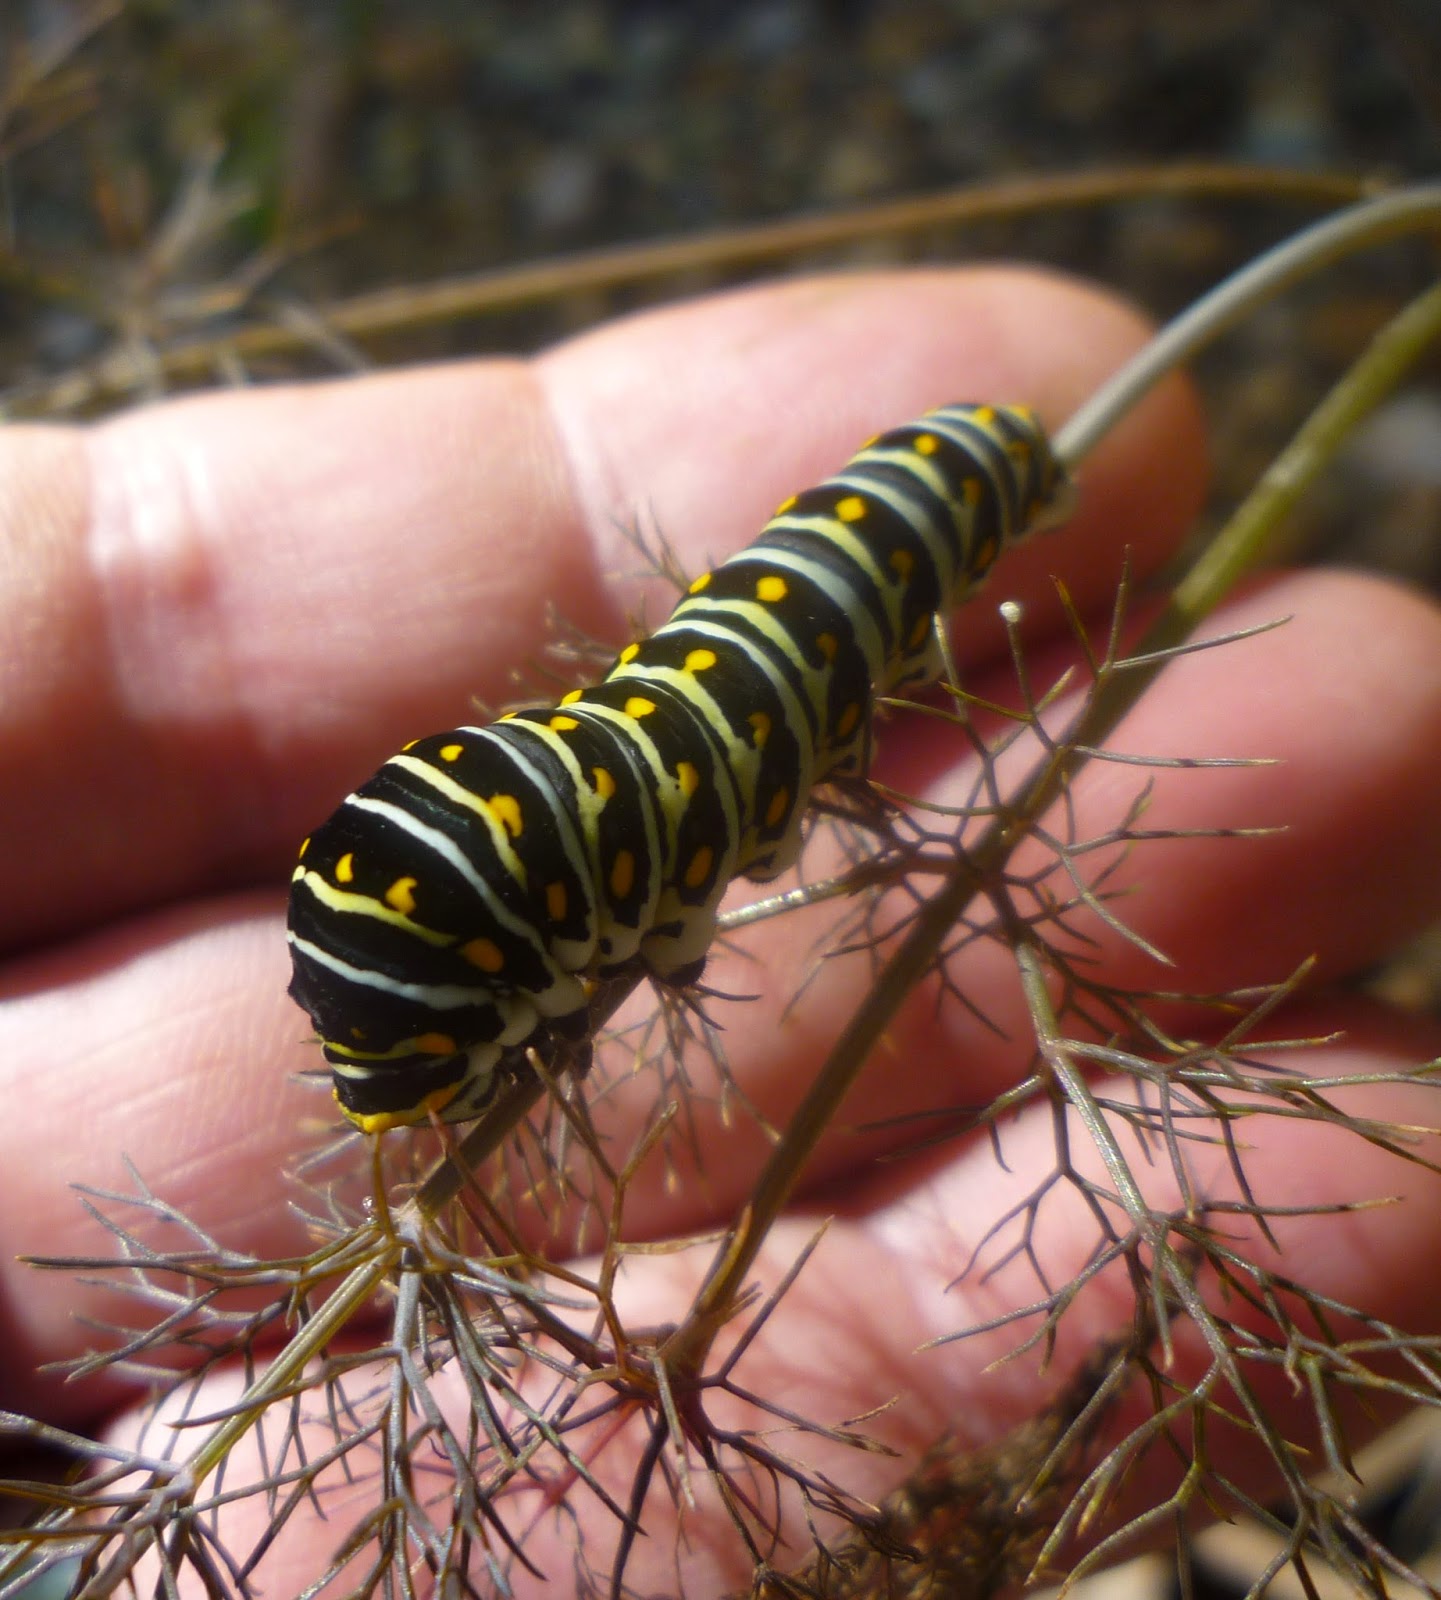 From Bluebirds to Turtles: Black Swallowtail Caterpillars on Bronze Fennel